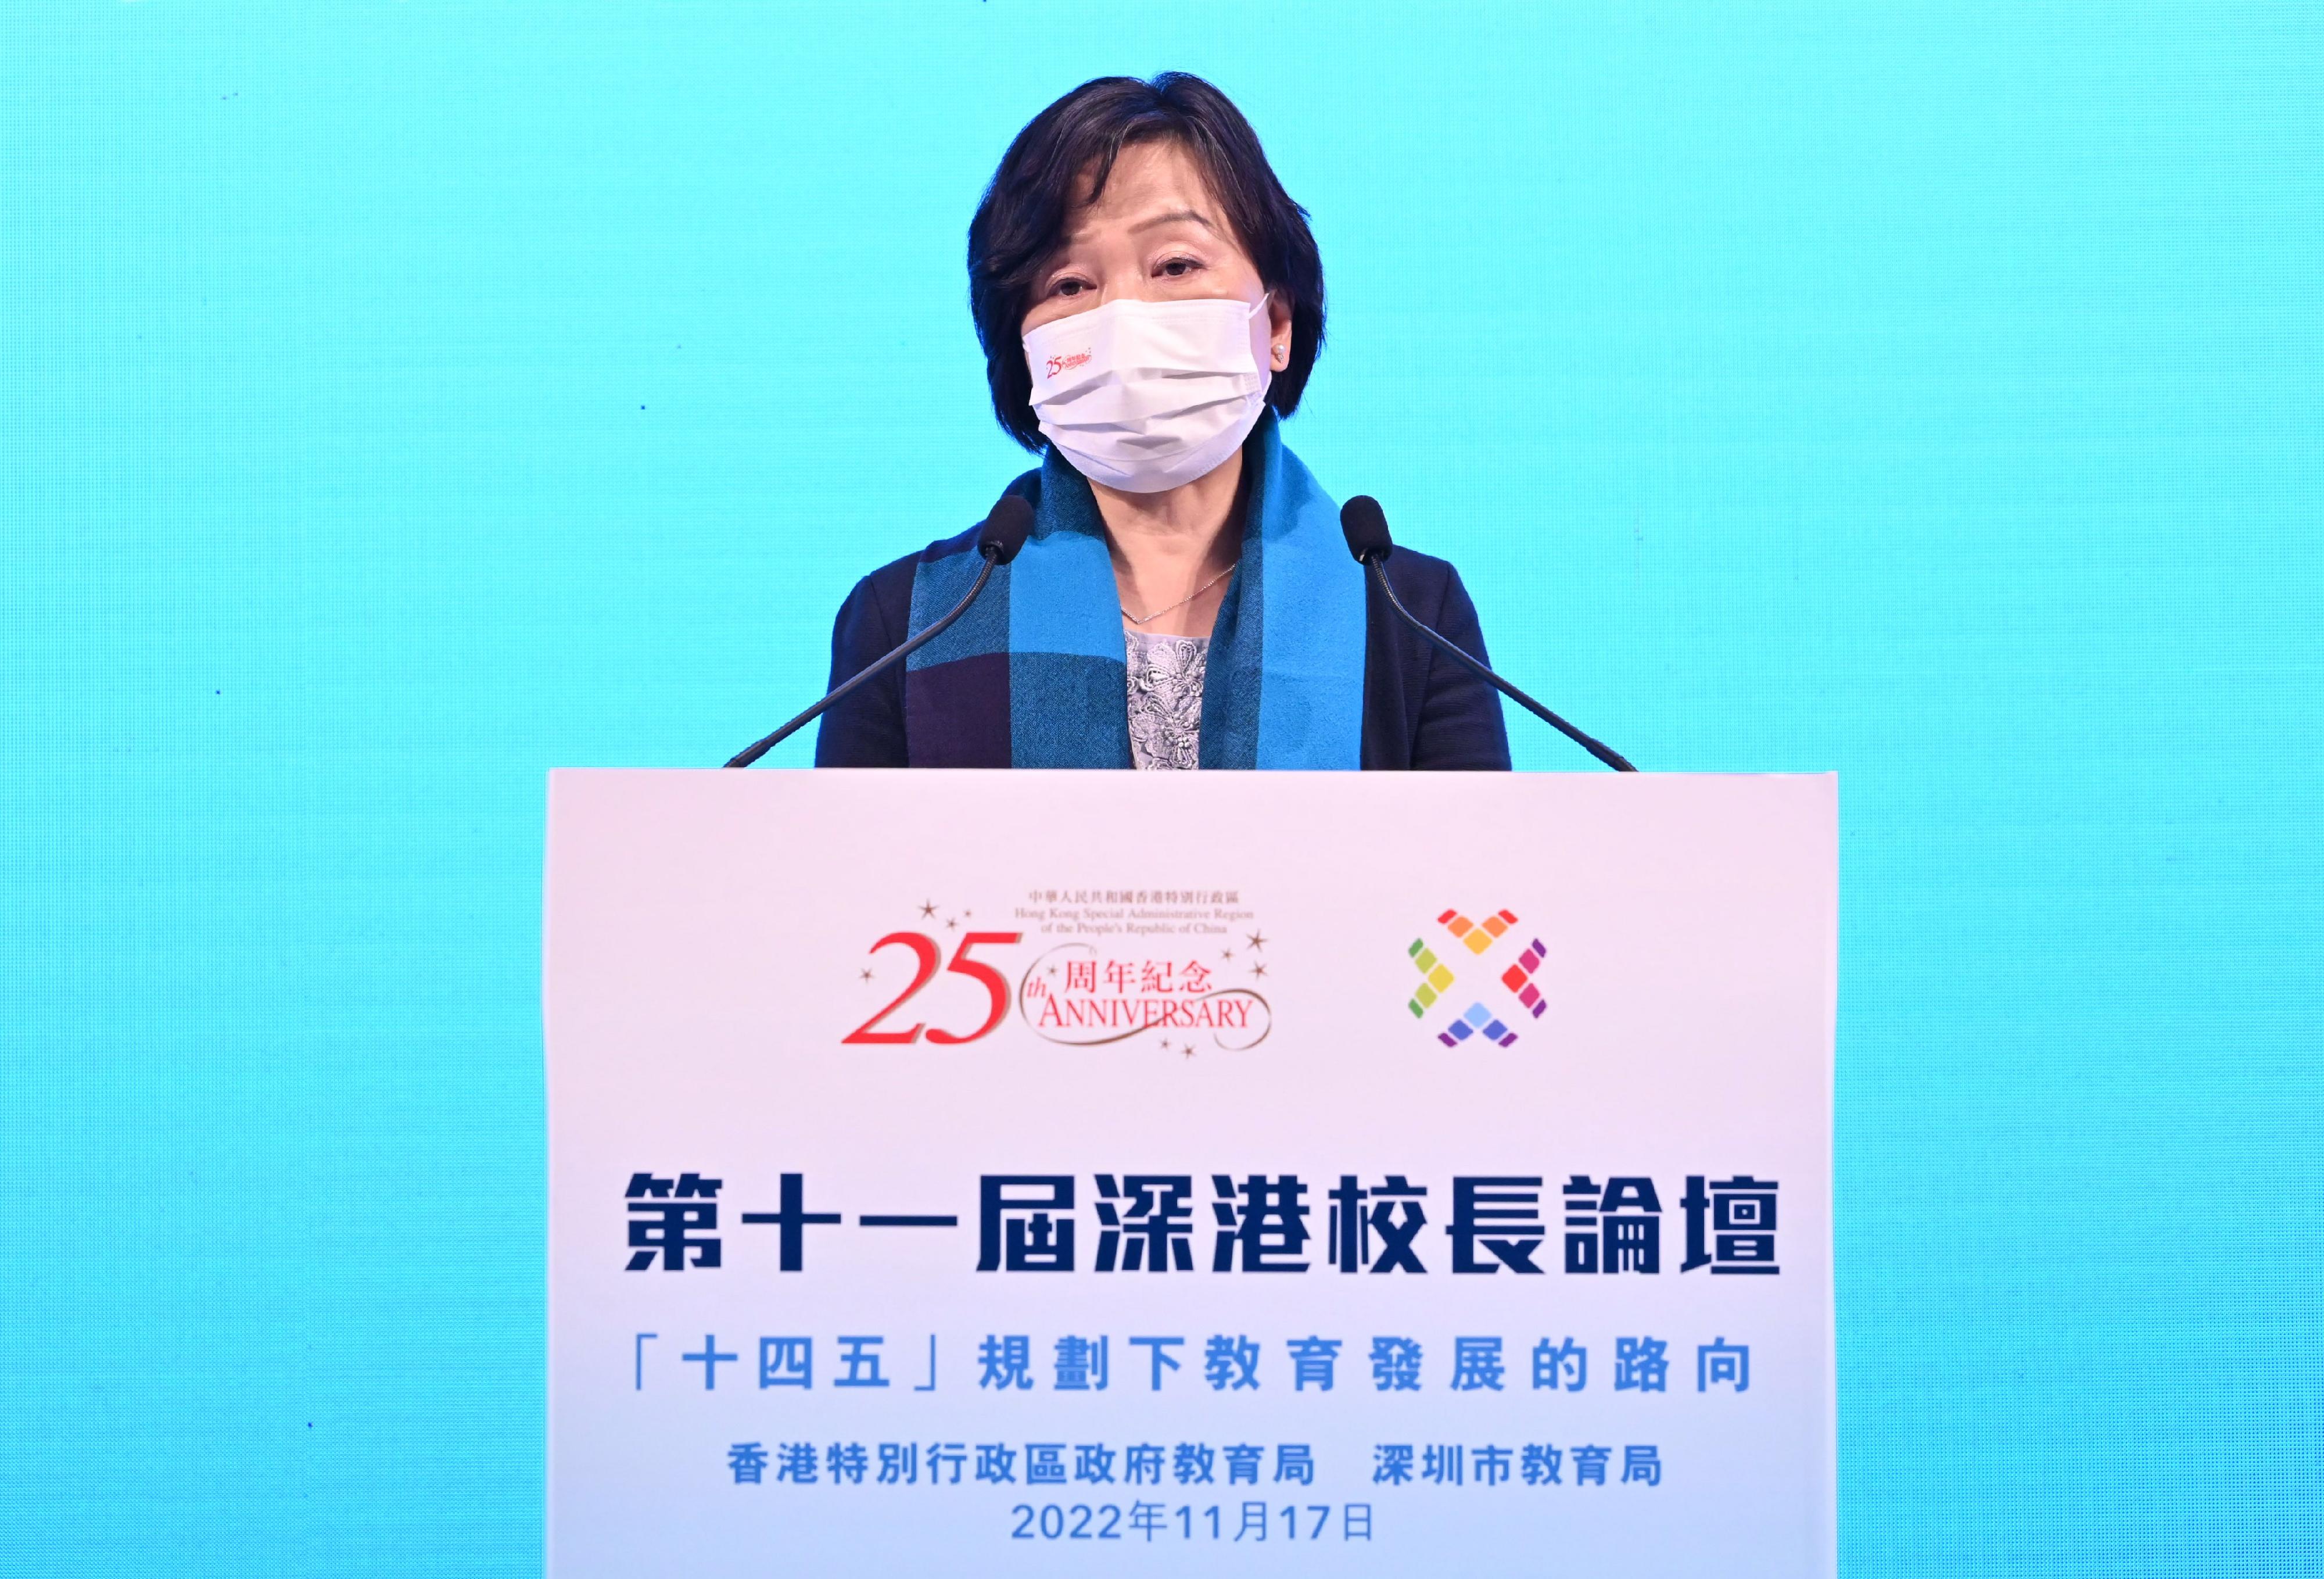 The Secretary for Education, Dr Choi Yuk-lin, speaks at the "Shenzhen-Hong Kong Principals' Forum cum Celebration of the 25th Anniversary of Establishment of the Hong Kong Special Administrative Region" co-organised by the Education Bureau and Shenzhen Municipal Education Bureau today (November 17).